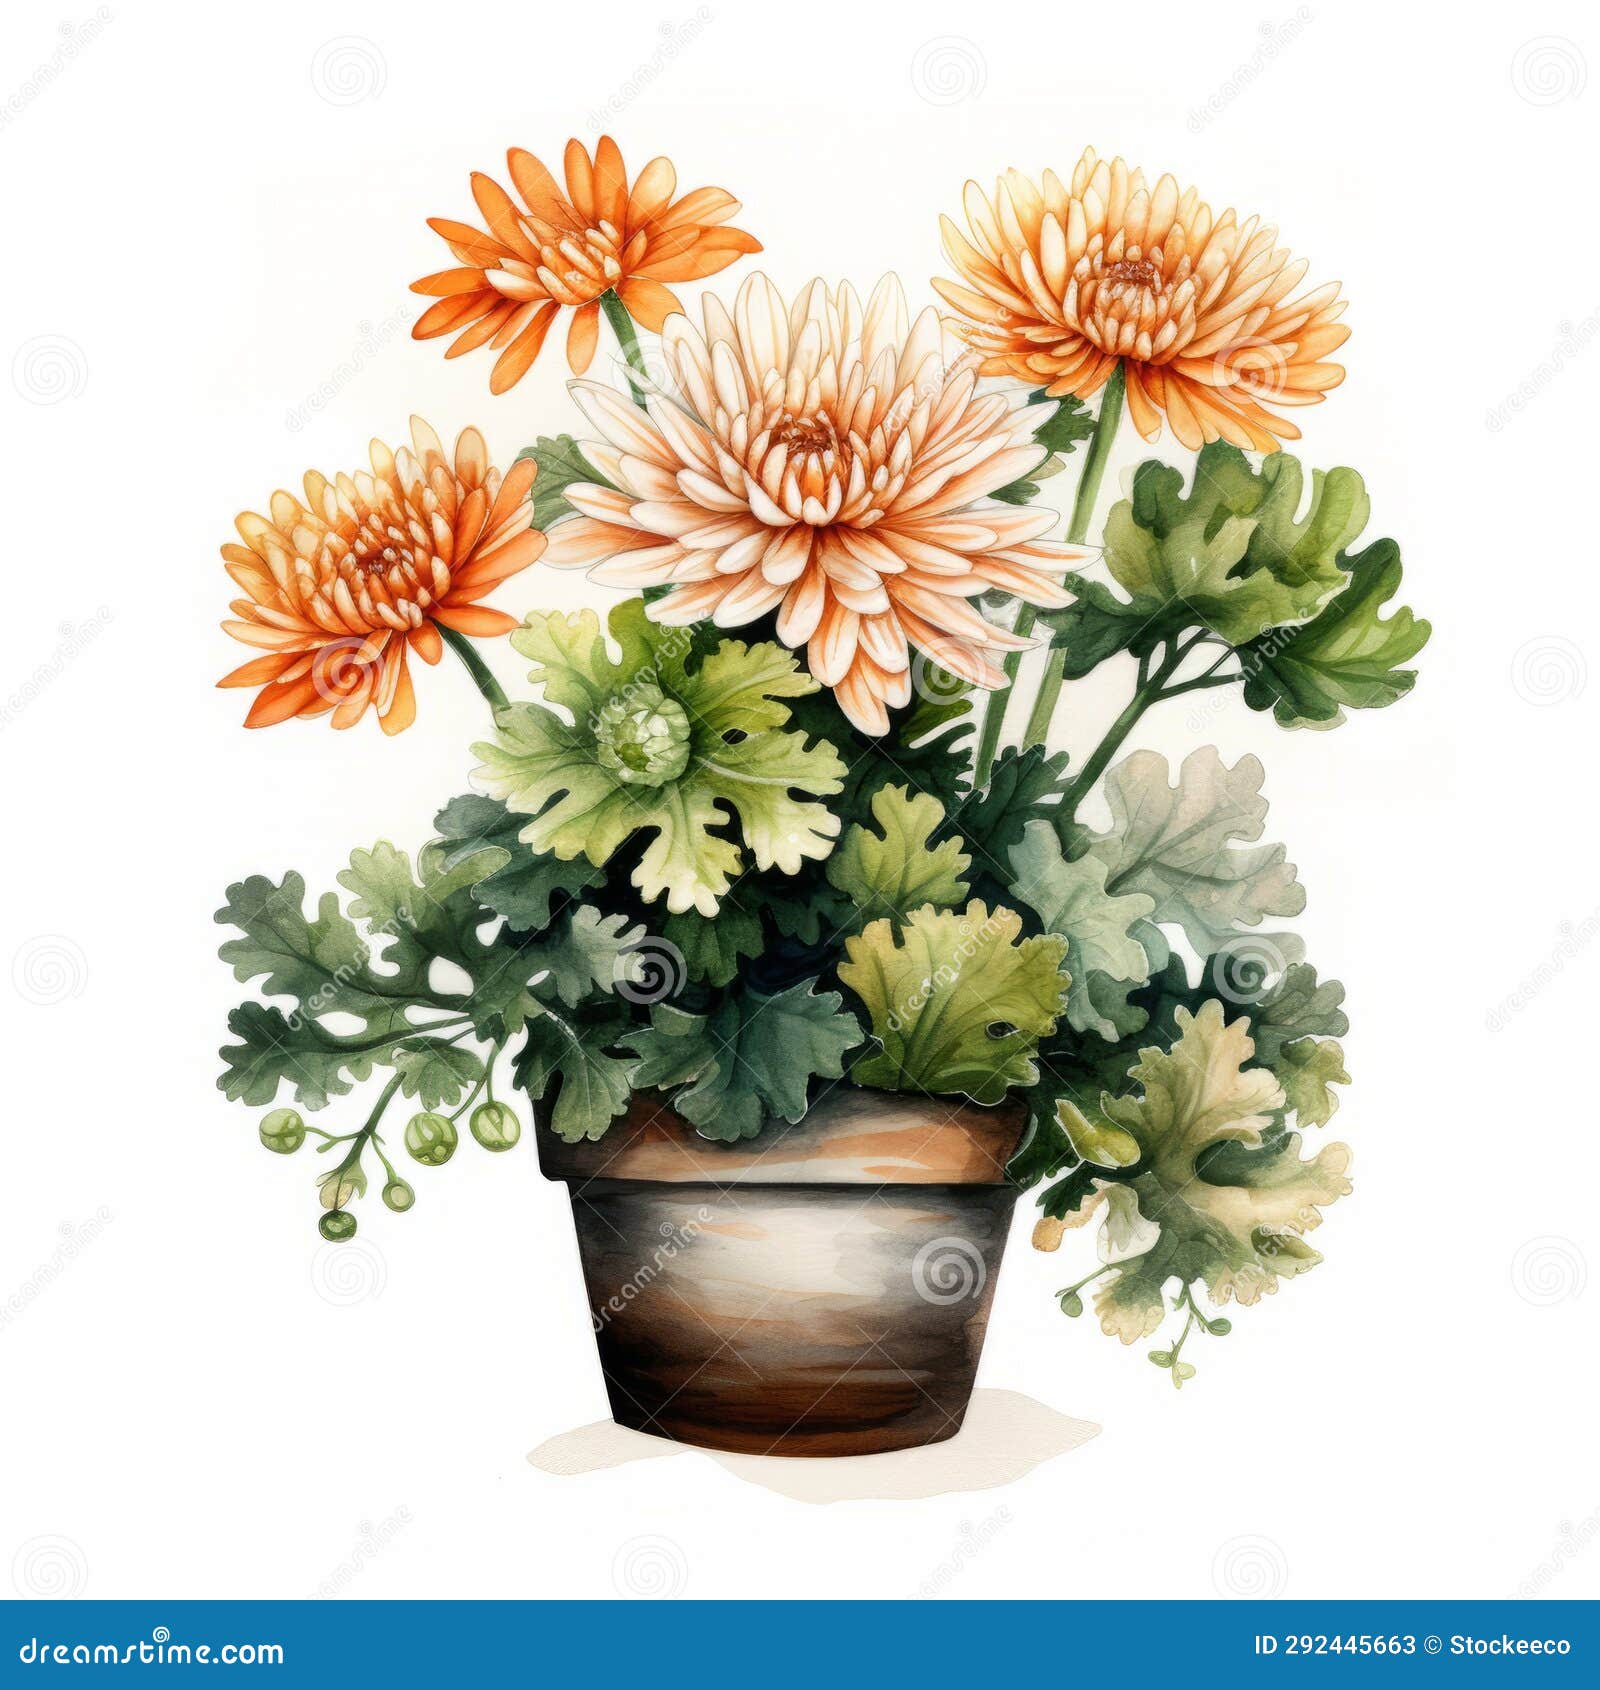 watercolor doodle of chrysanthemum flower and plants in pot